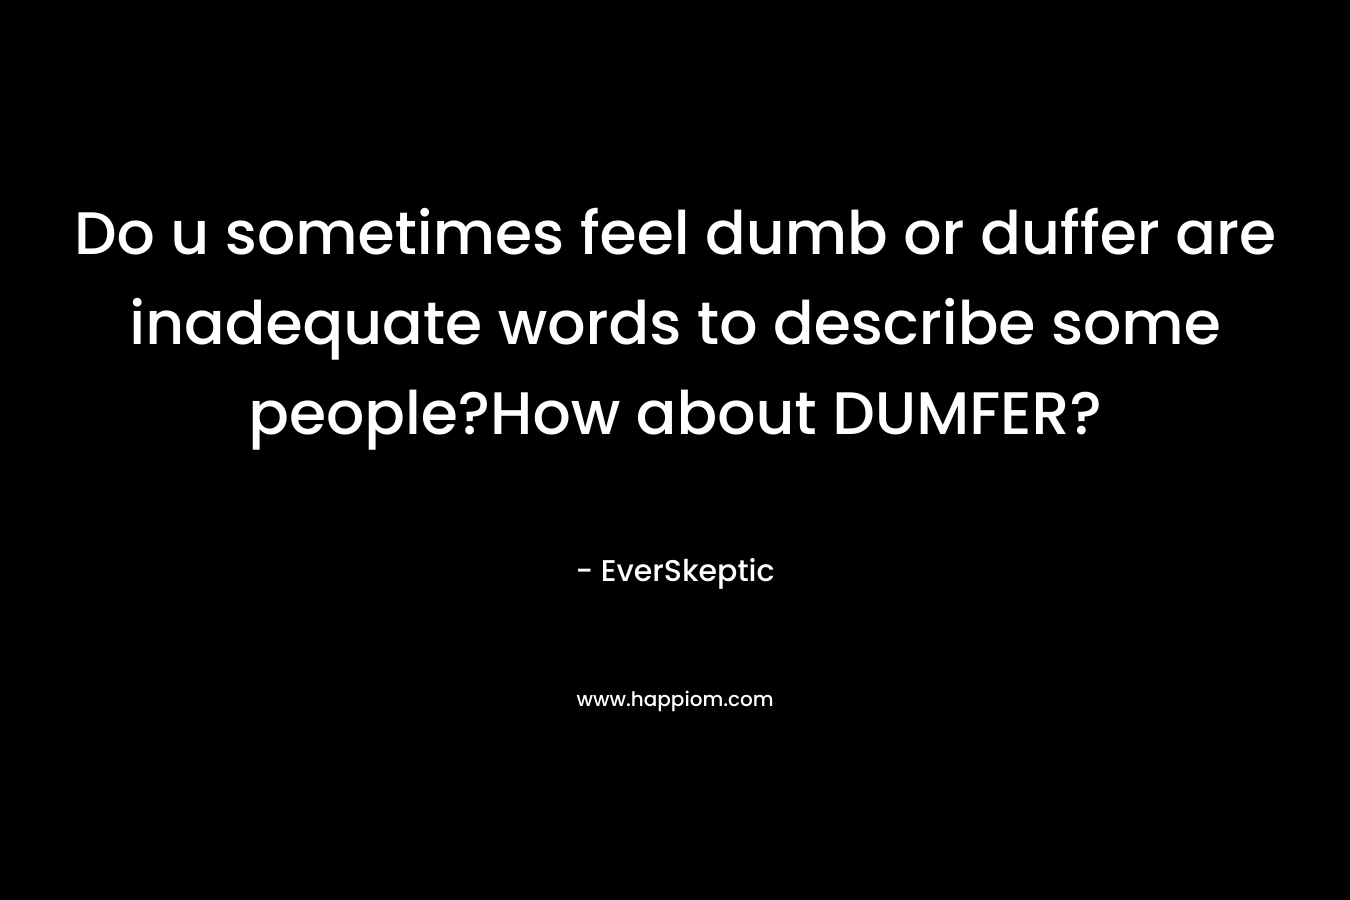 Do u sometimes feel dumb or duffer are inadequate words to describe some people?How about DUMFER?